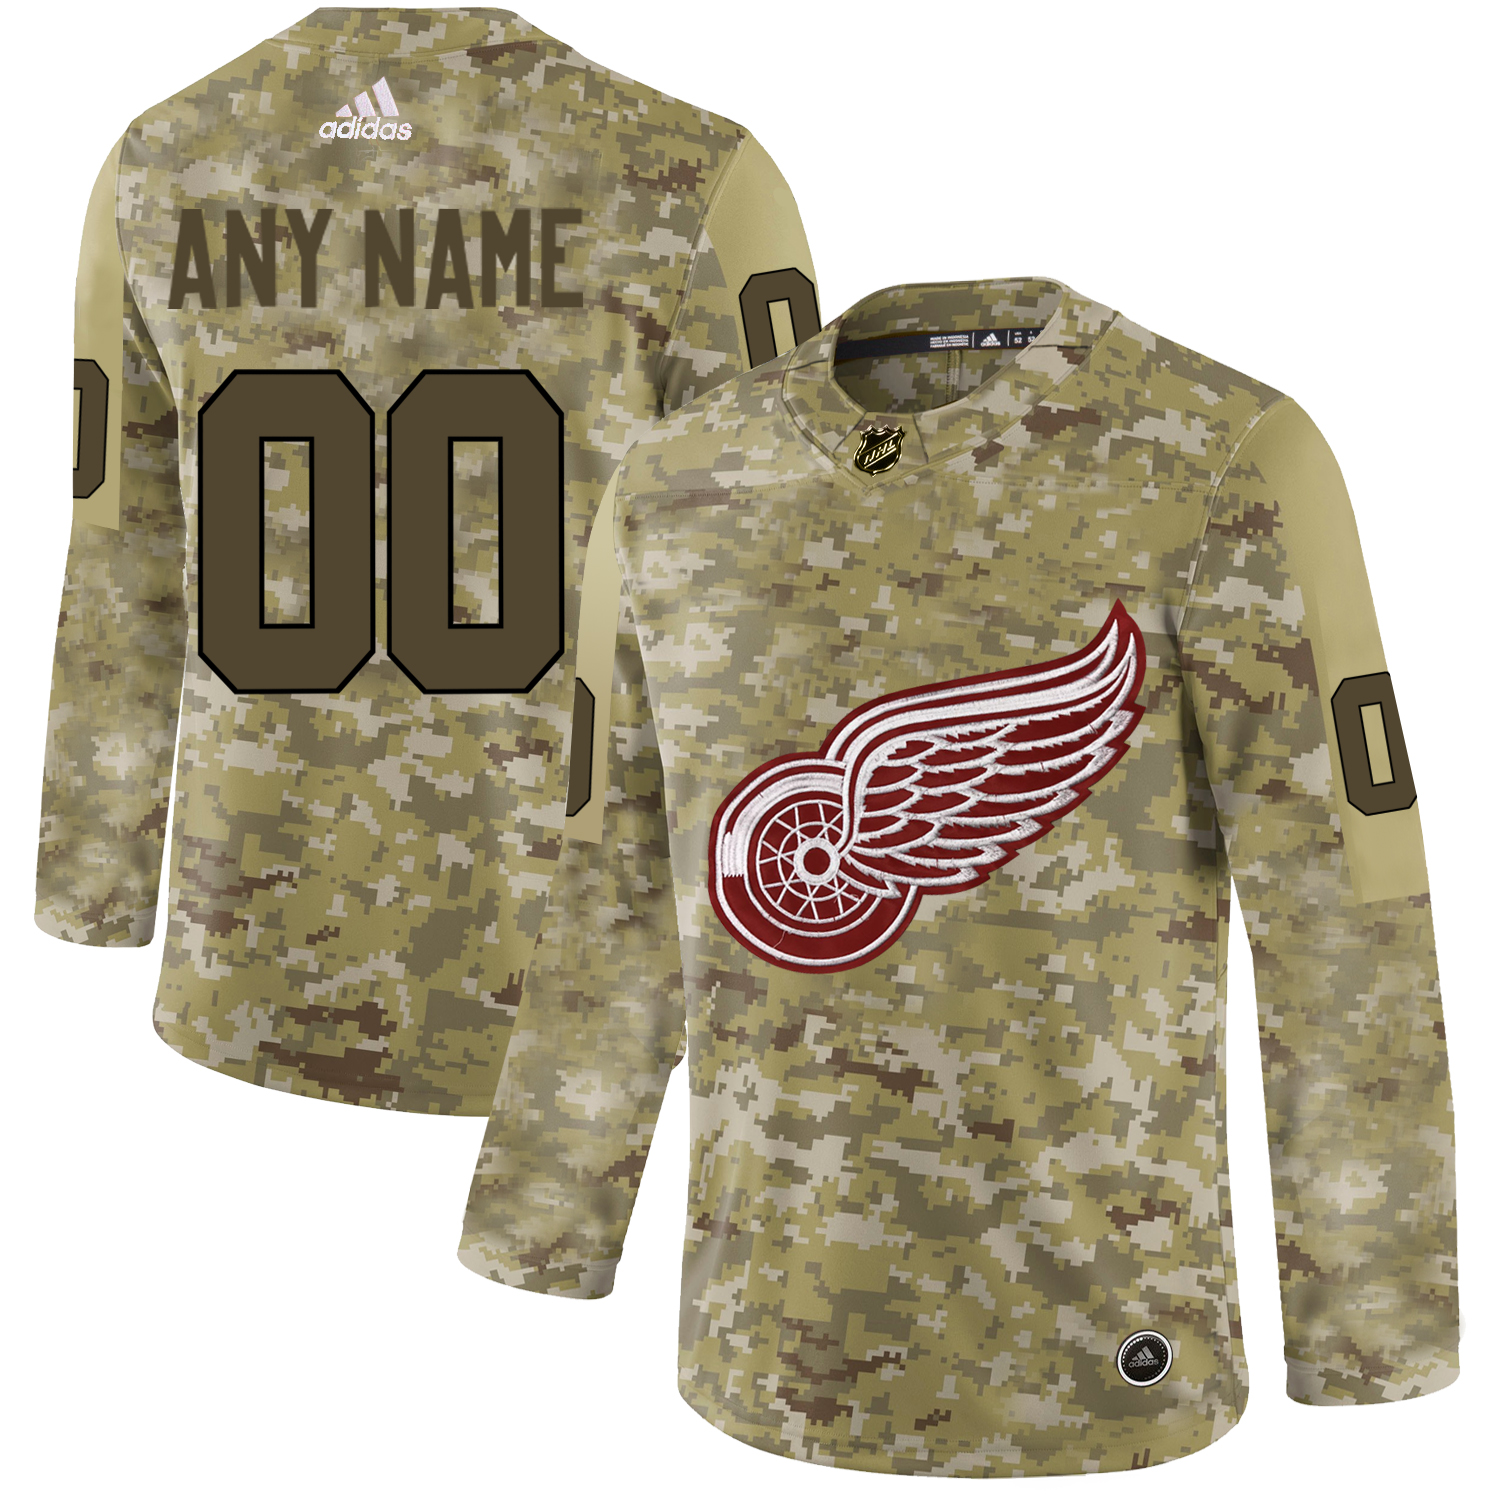 Men's Adidas Red Wings Personalized Camo Authentic NHL Jersey